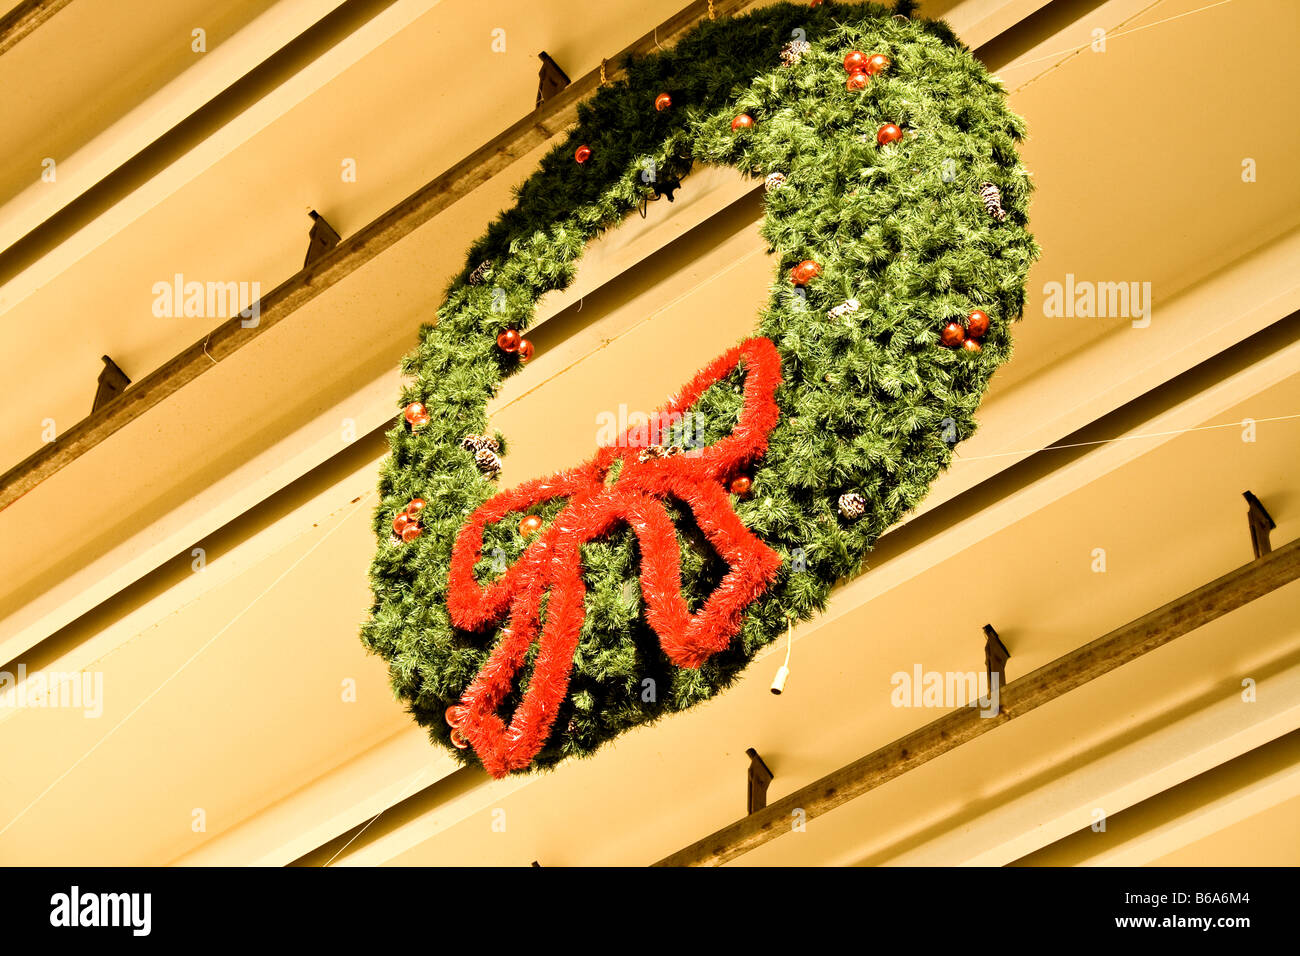 Large Christmas Wreath With A Red Bow Hanging High Up On A